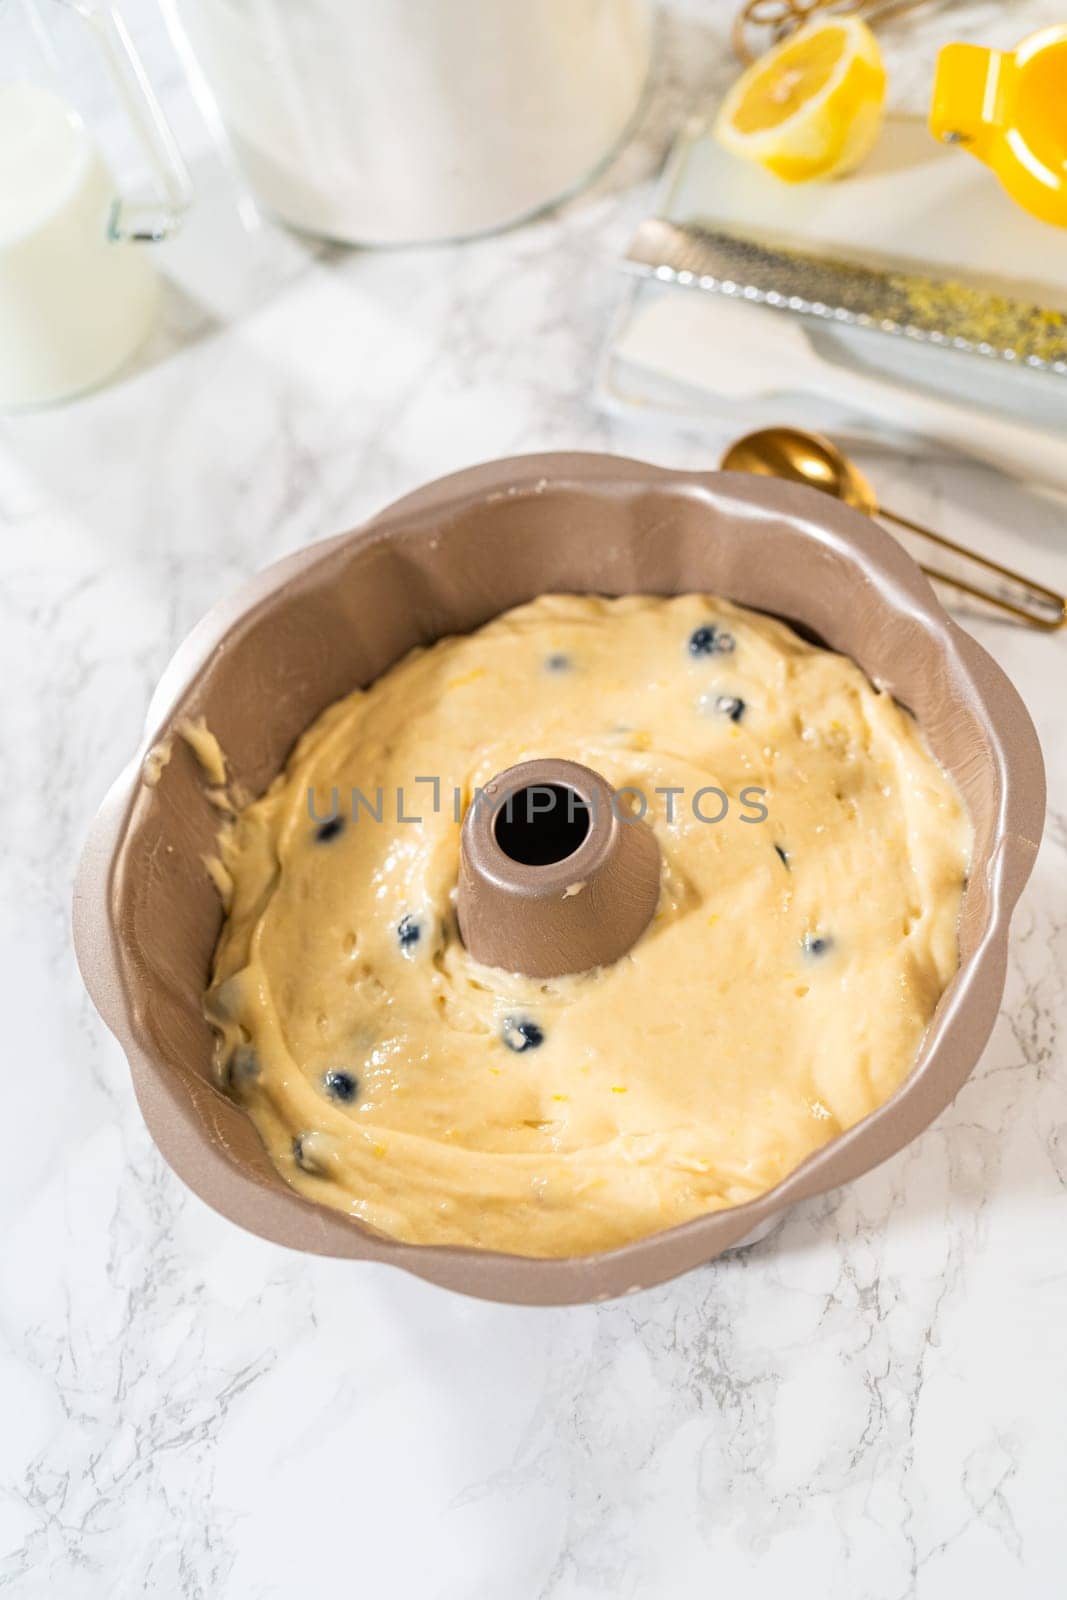 Delicately transferring the cake batter into the pre-greased bundt cake pan, setting the stage for a successful baking process.